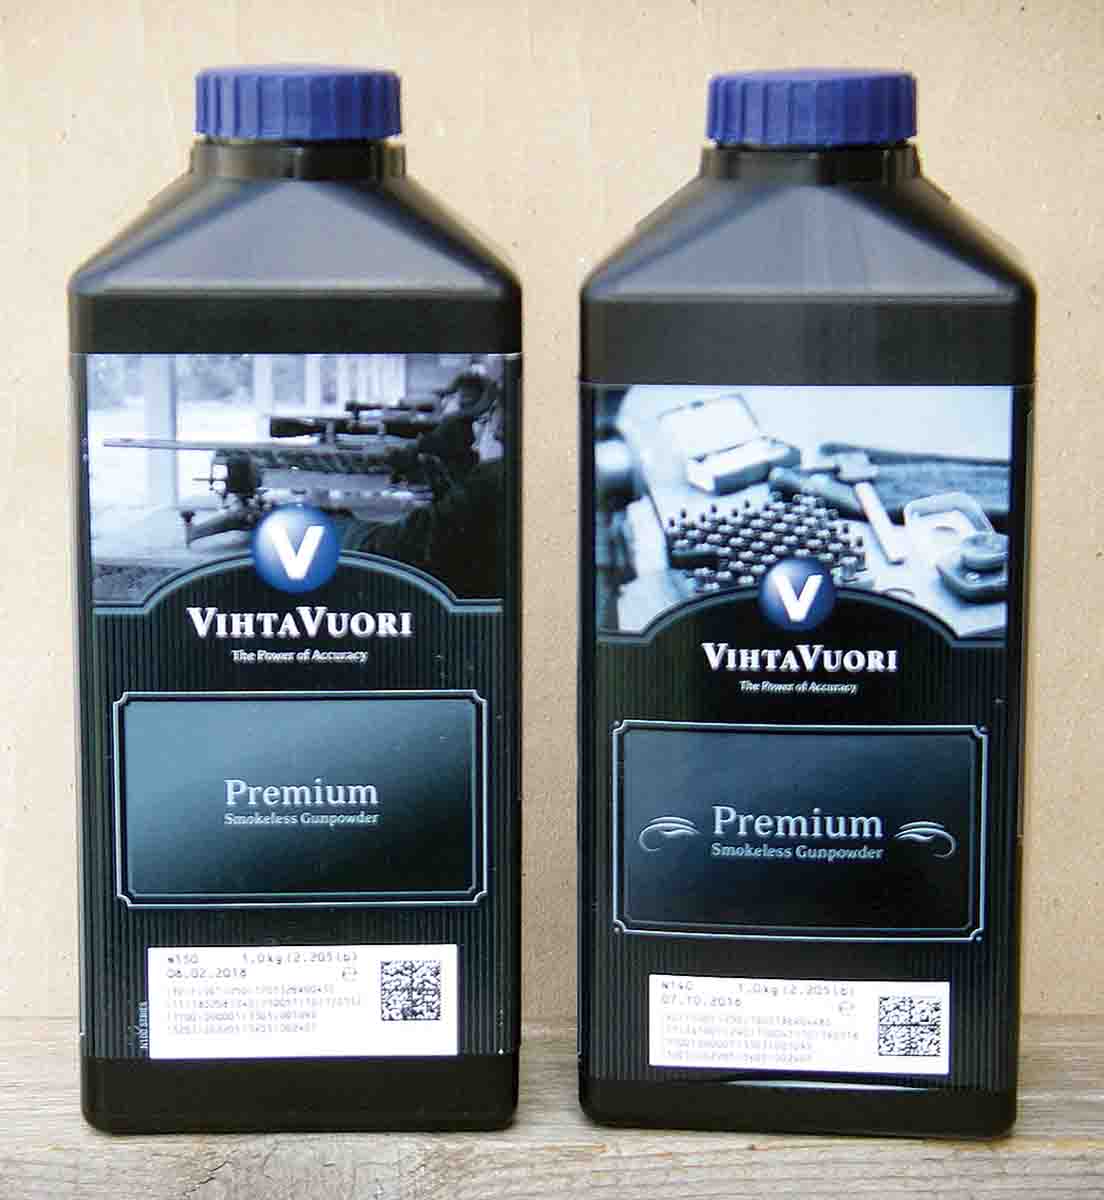 Vihtavuori N140 and N150 powders proved accurate in the test rifle.